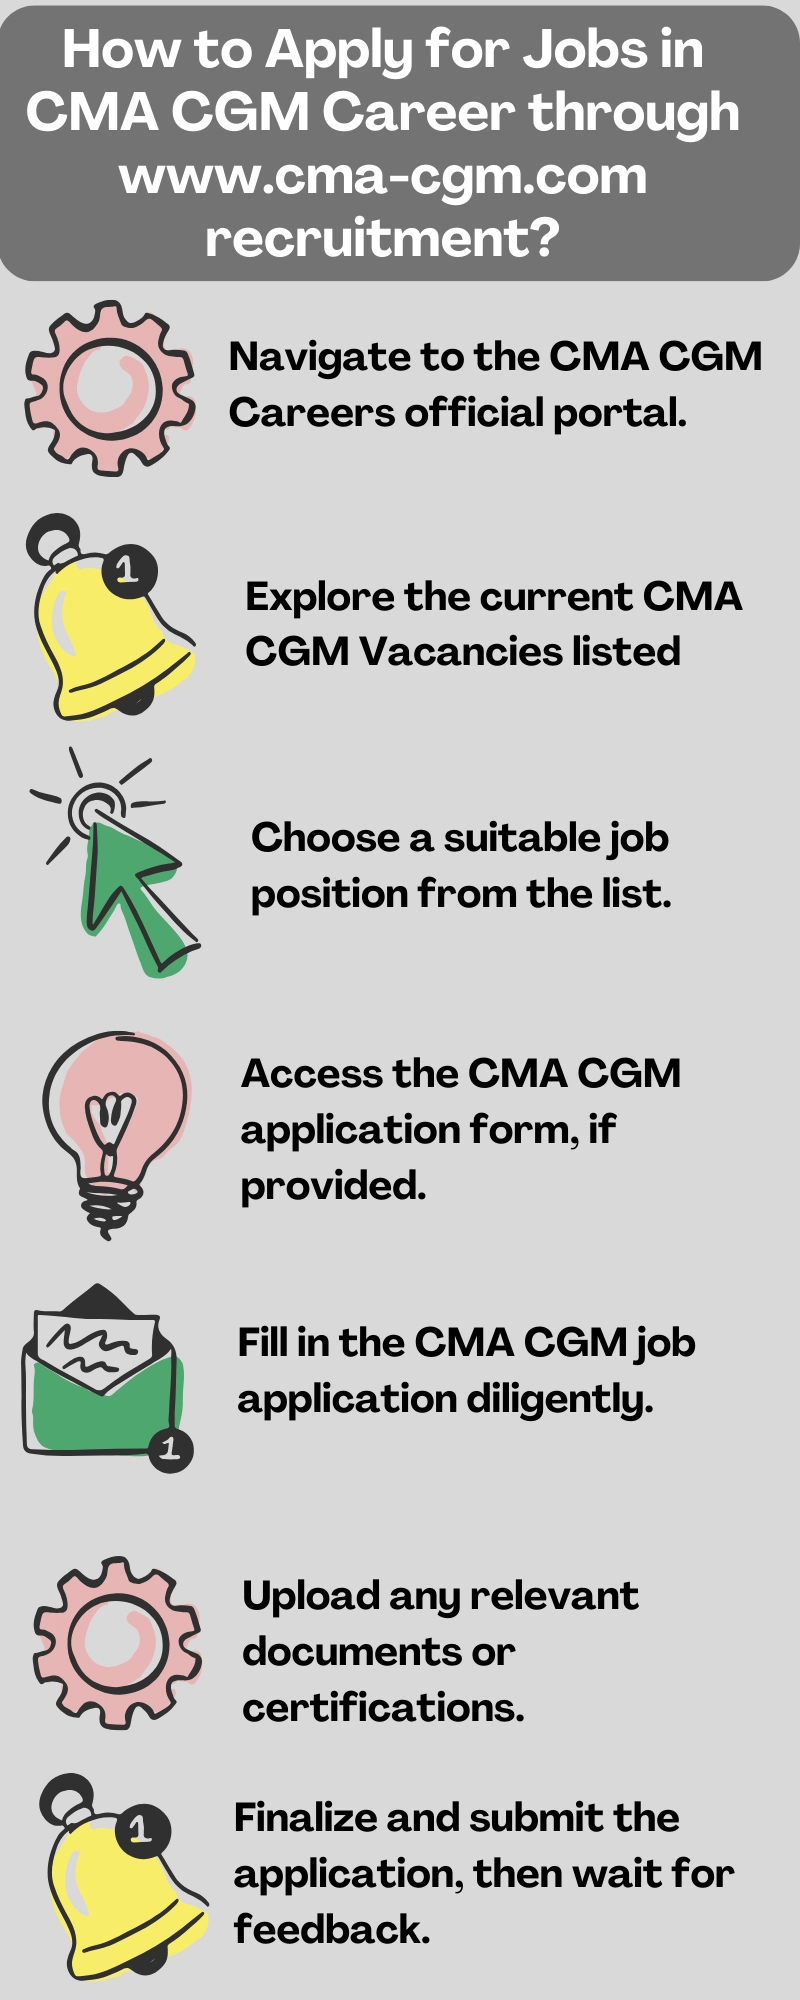 How to Apply for Jobs in CMA CGM Career through www.cma-cgm.com recruitment?